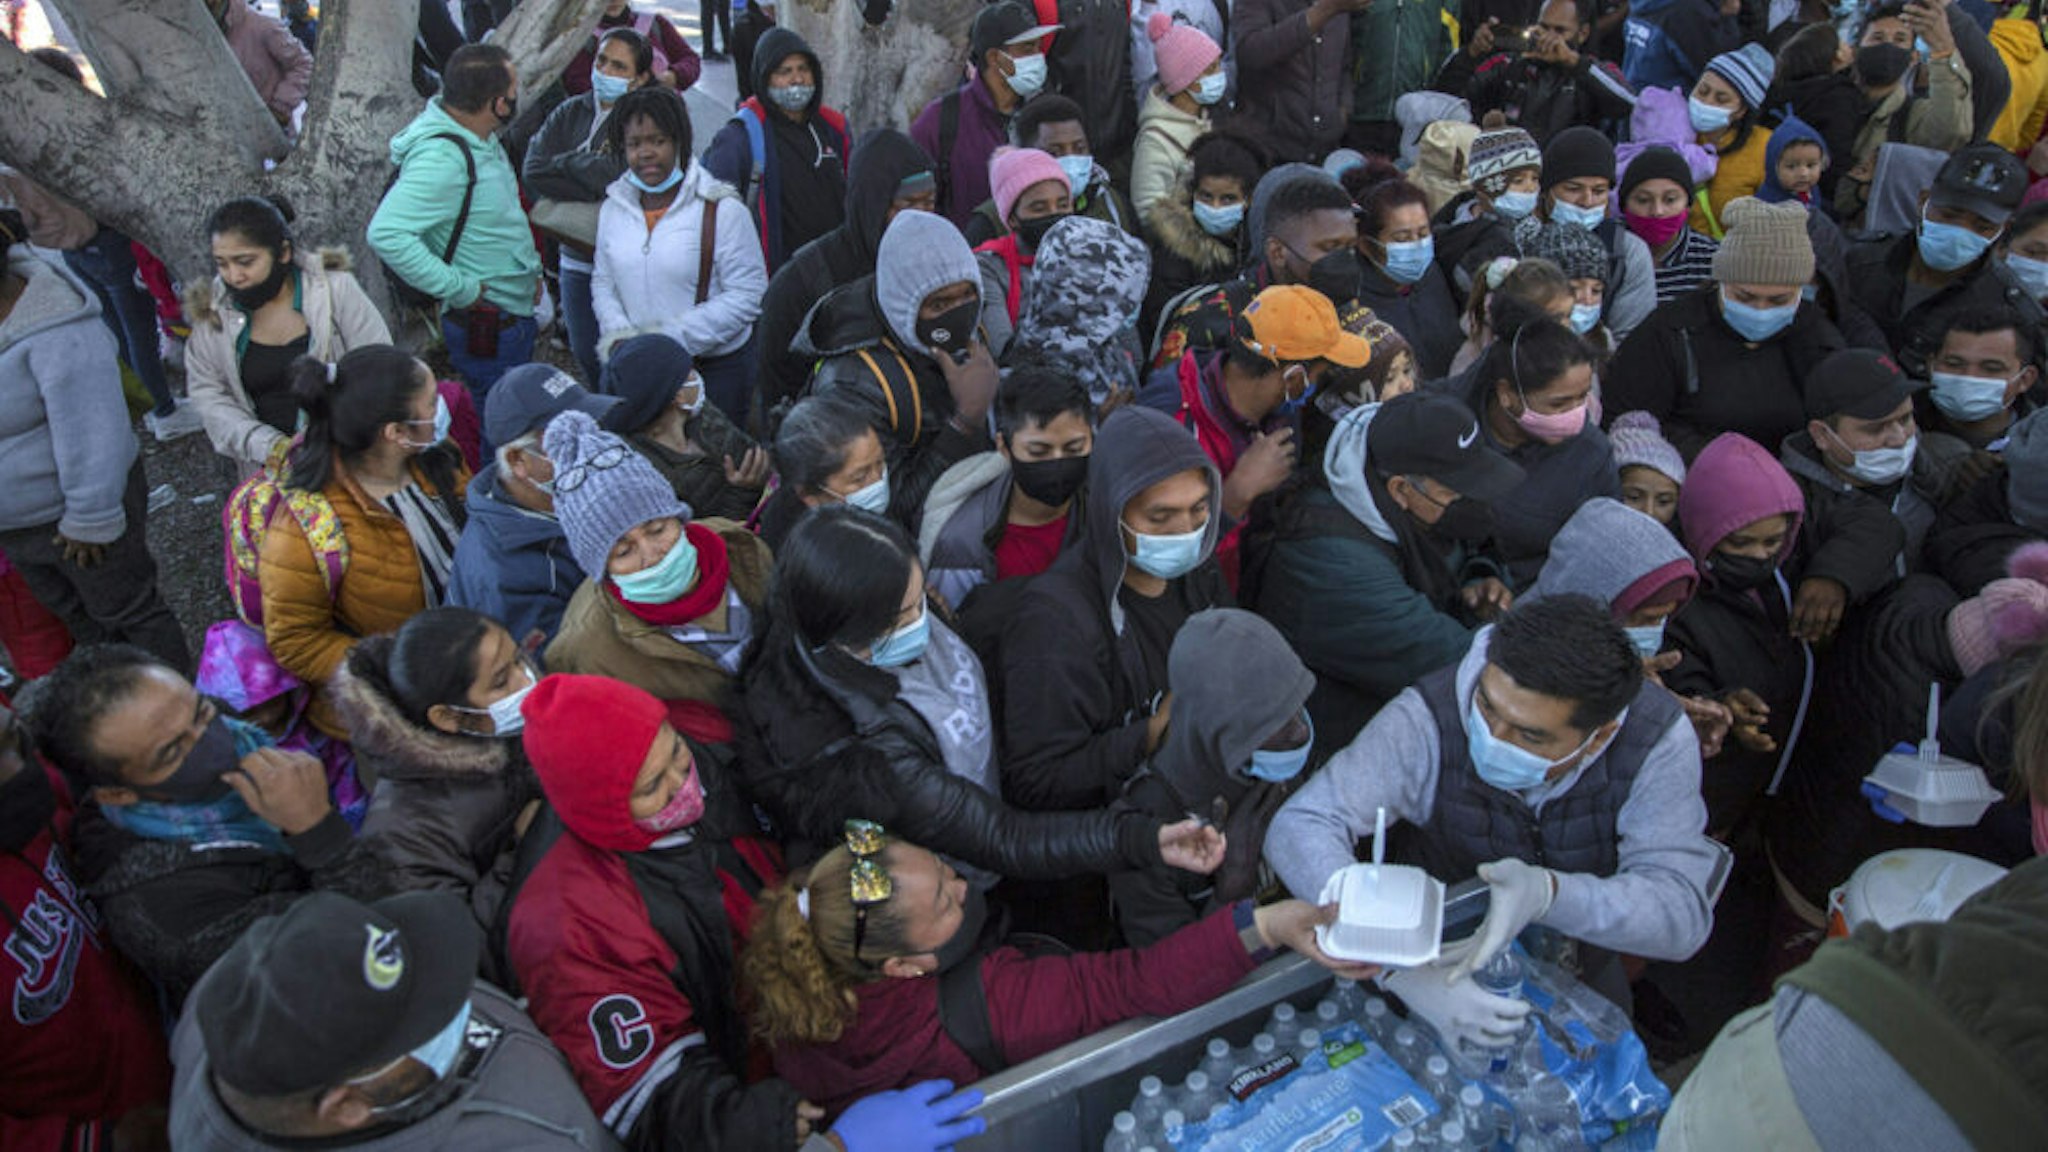 19 February 2021, Mexico, Tijuana: Numerous migrants wearing masks gather and wait for food and water to be distributed at the border crossing. Following the announced change of direction in US migration policy, numerous migrants have gathered at the border between Mexico and the US, hoping to gain entry to the US. With the new regulation US President Biden's administration is breaking with the restrictive immigration policy of his predecessor Trump.